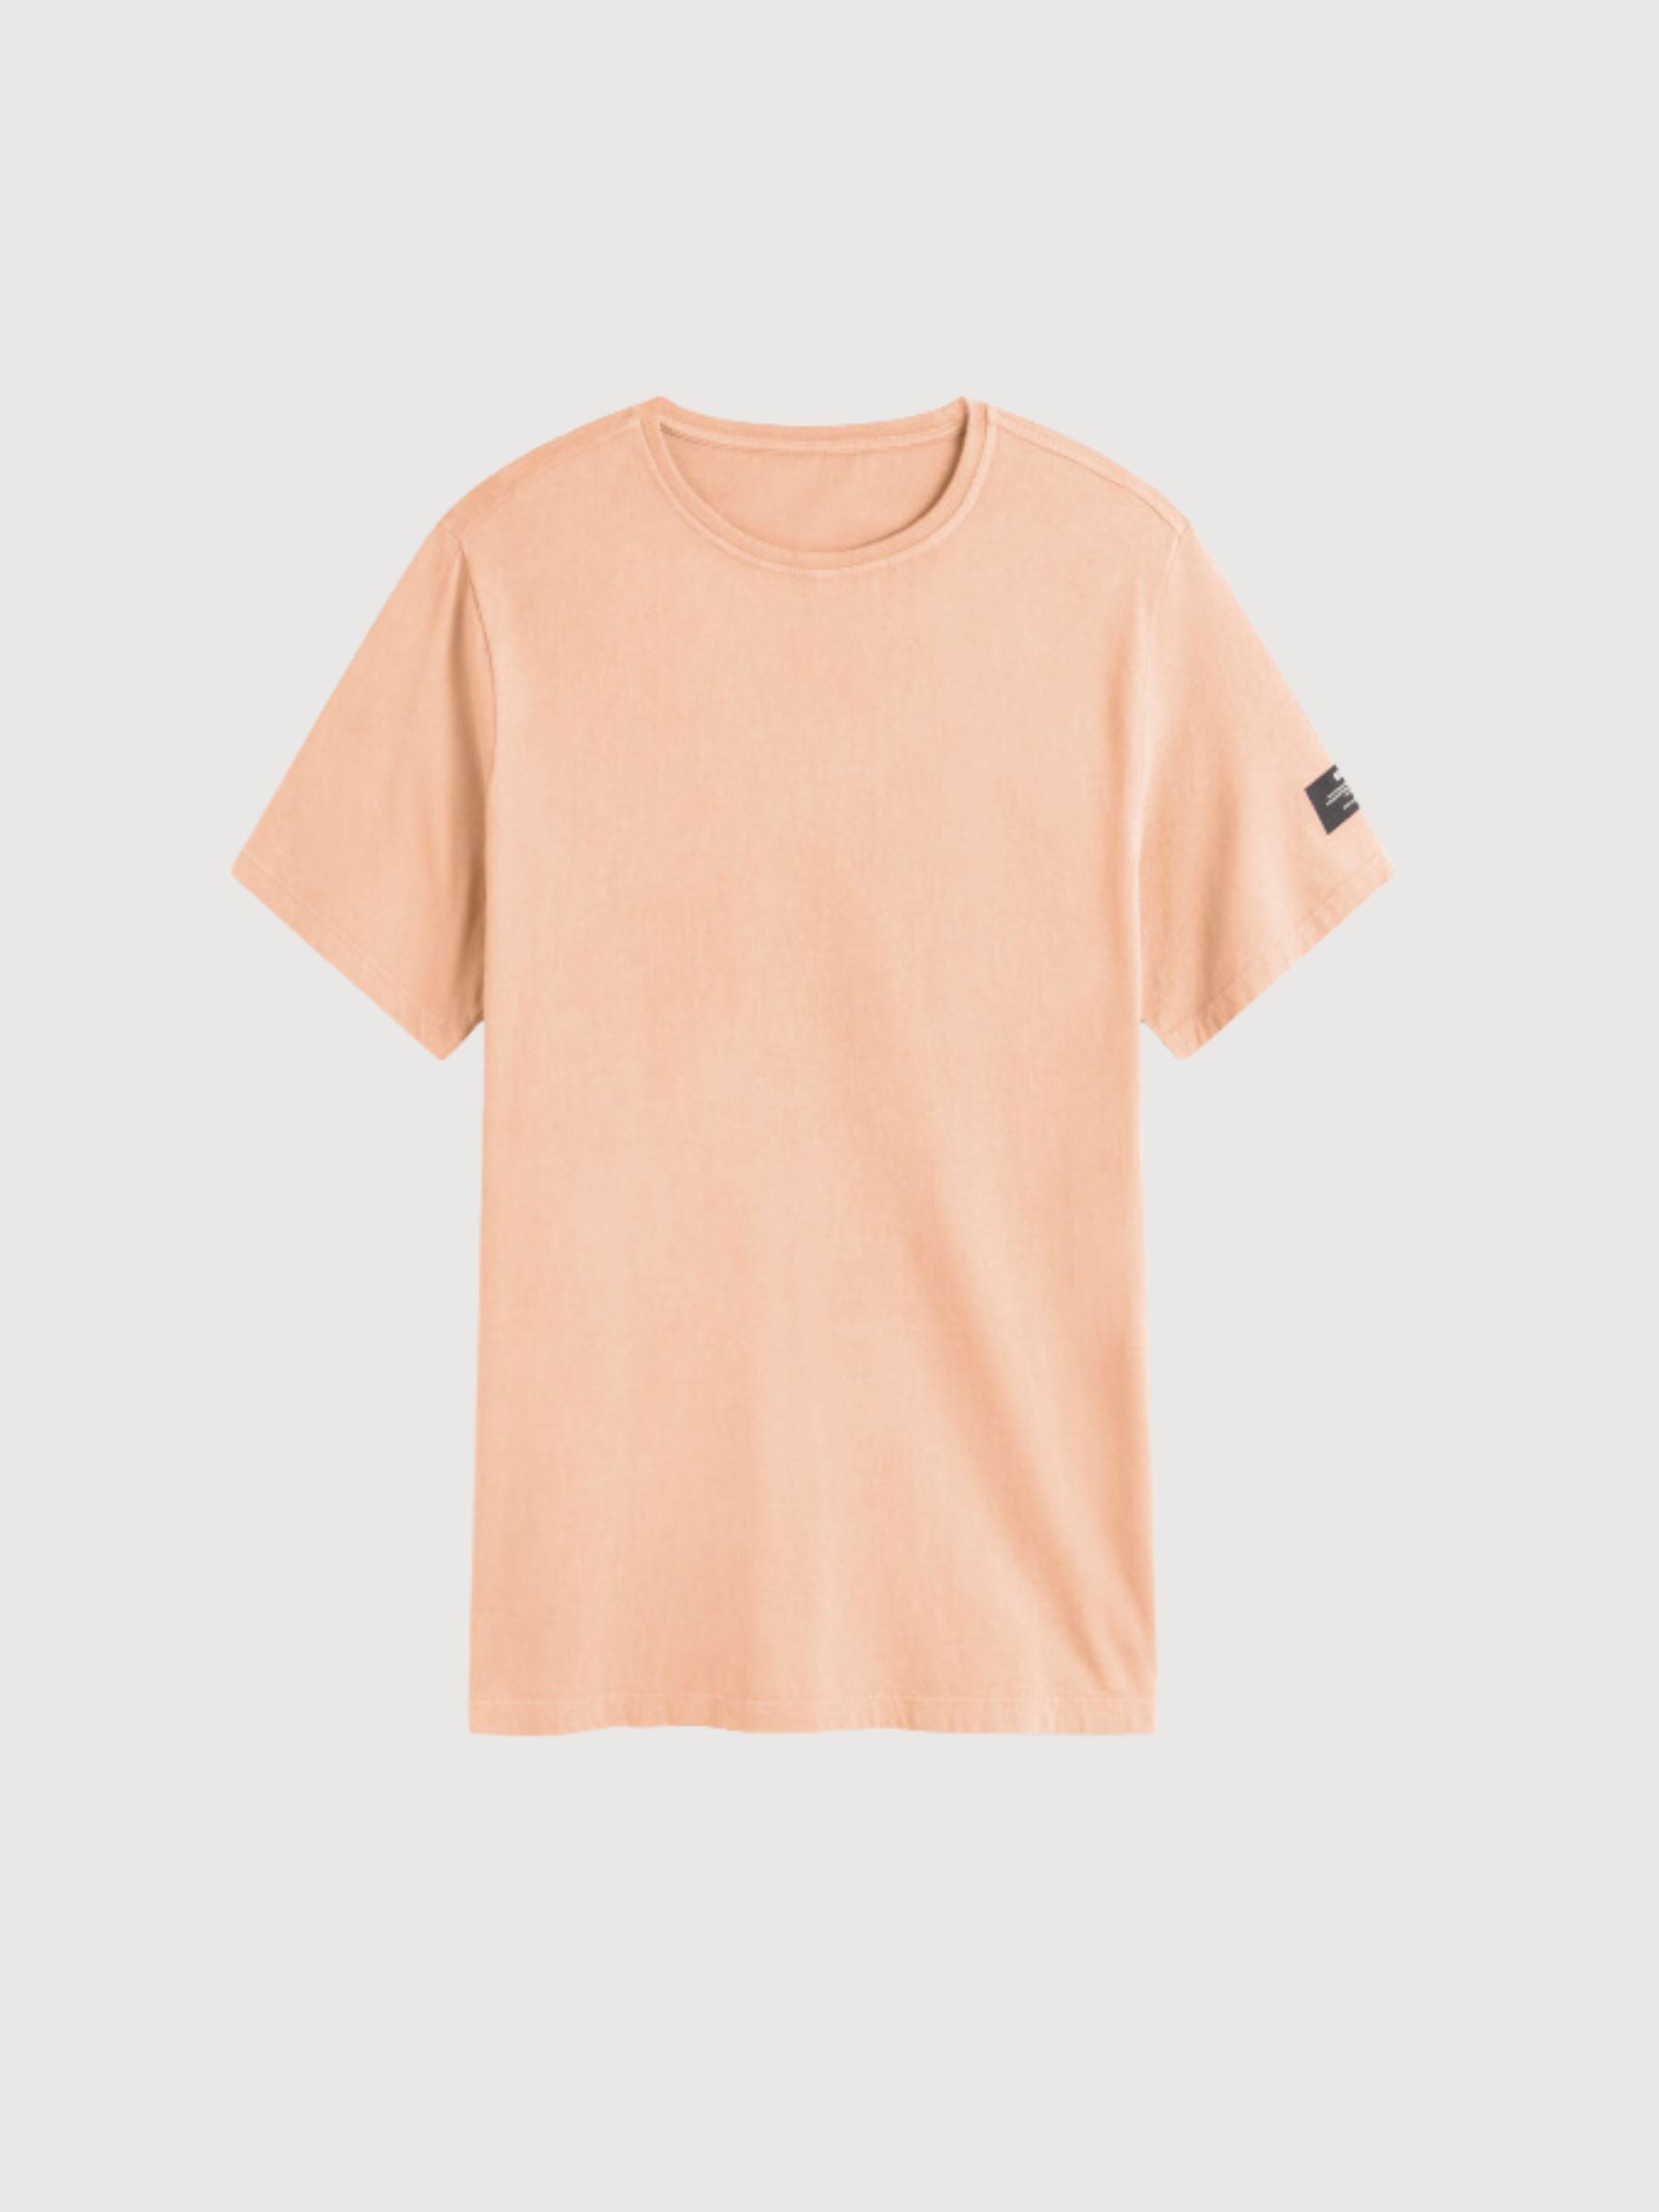 T-Shirt Vent Orange in Recycled Cotton | Ecoalf